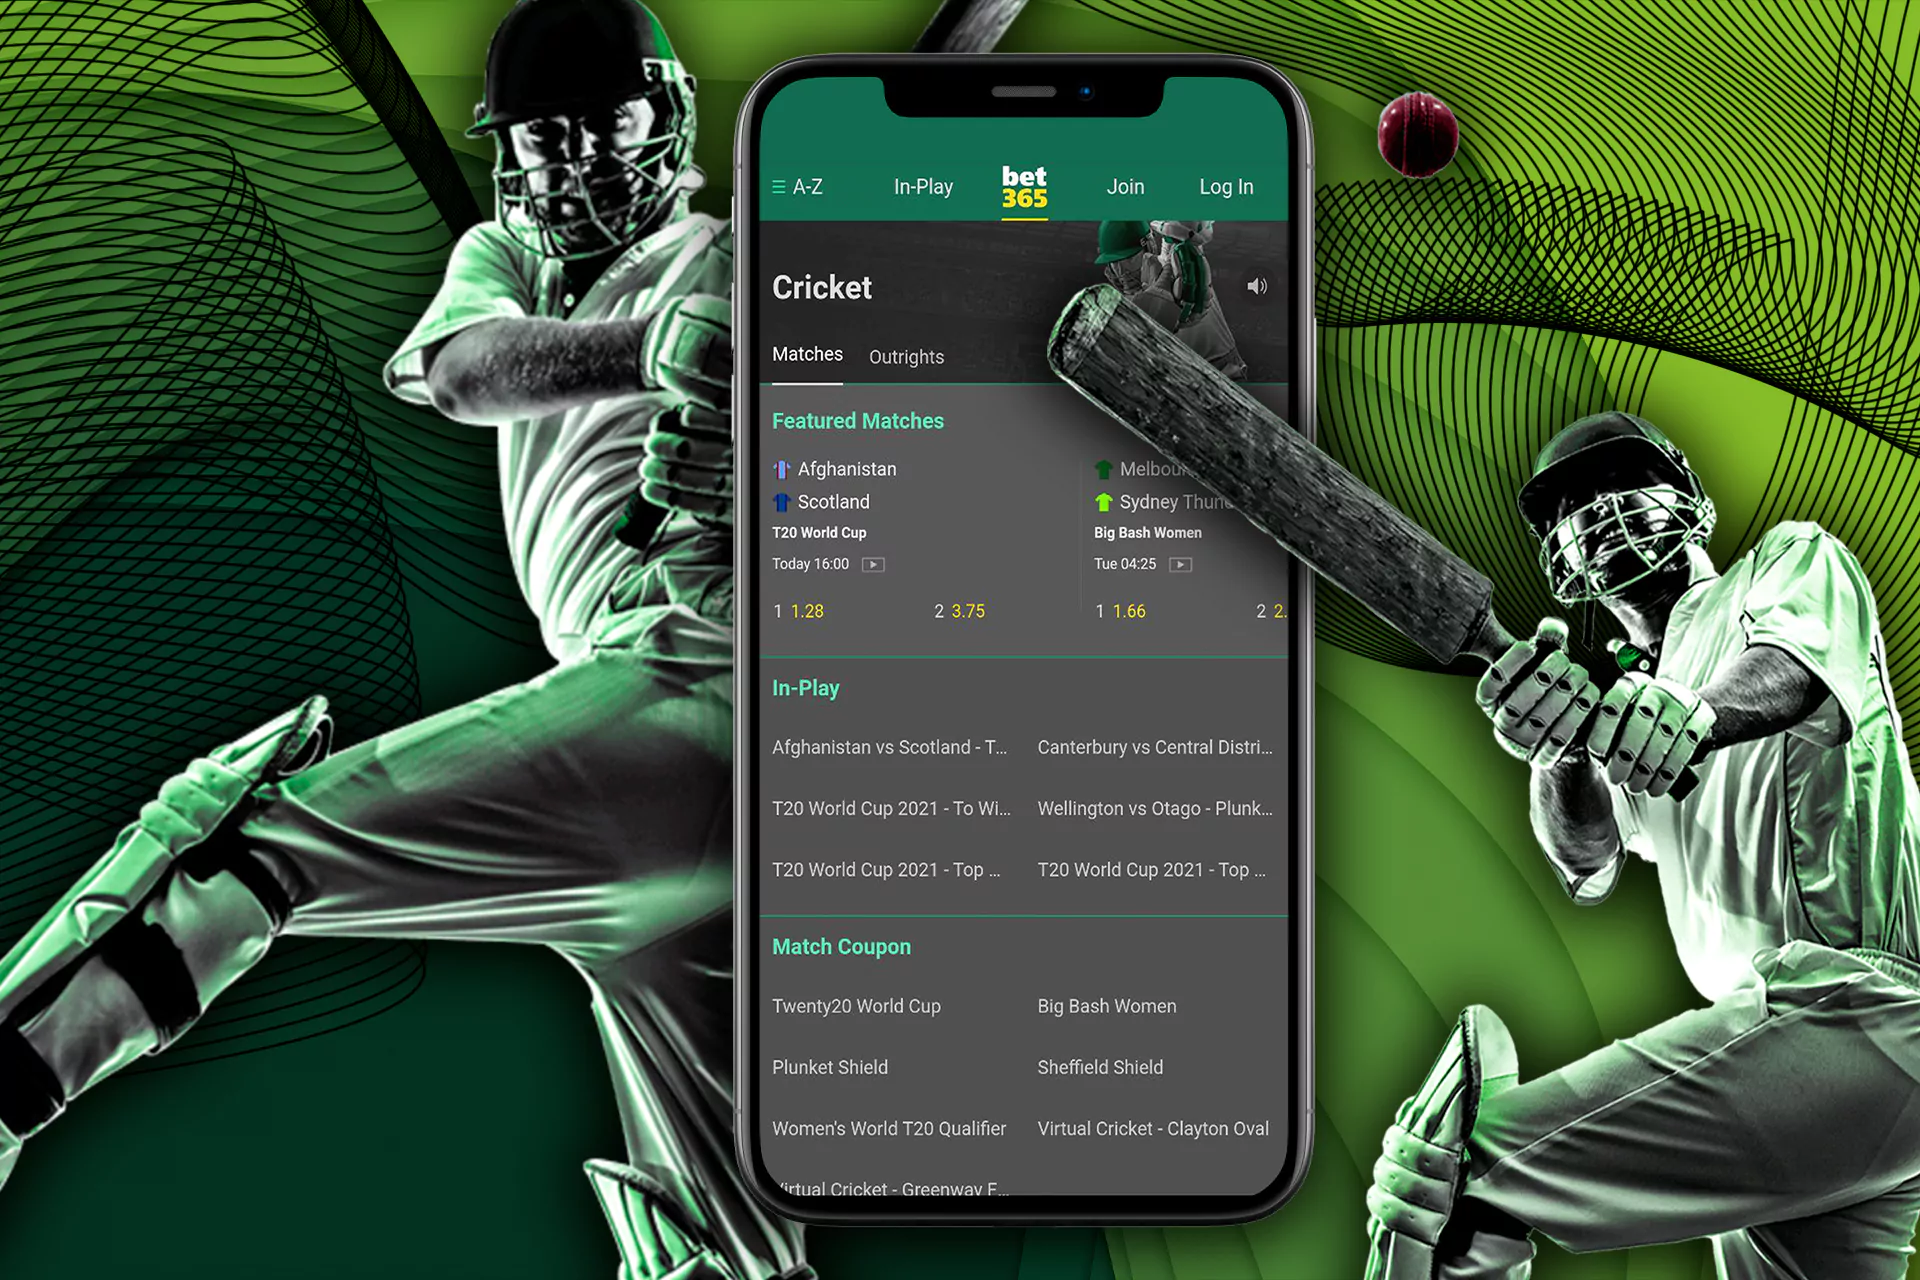 A step-by-step guide on how to bet on cricket through the Bet365 app.